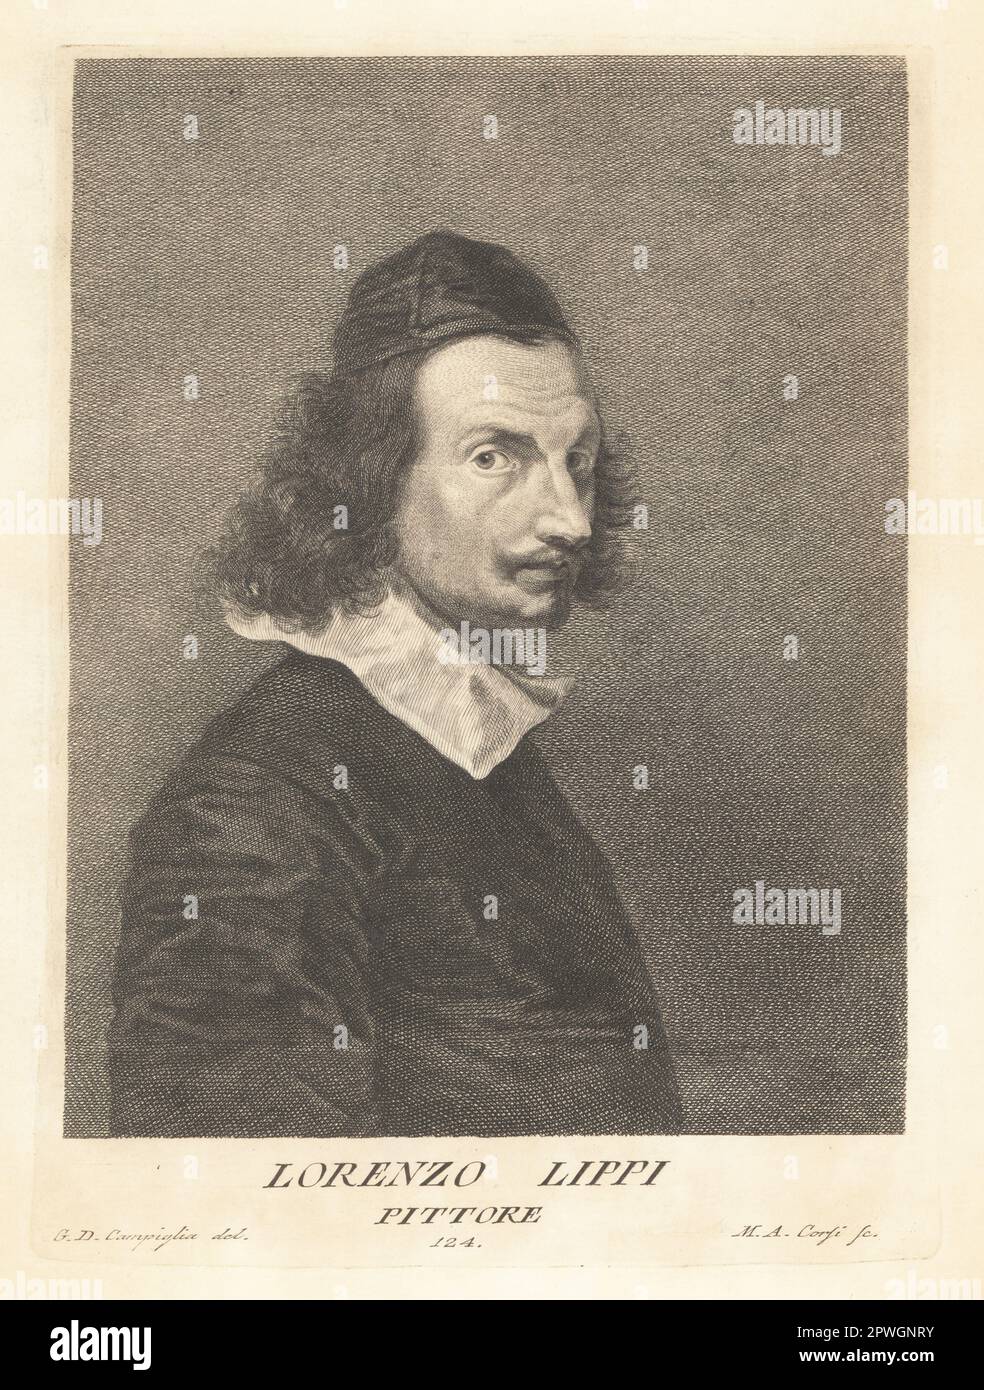 Lorenzo Lippi, Italian painter and poet from Florence, court painter in Innsbruck, 1606-1665. Pittore. Copperplate engraving by Marcantonio Corsi after Giovanni Domenico Campiglia after a self portrait by the artist from Francesco Moucke's Museo Florentino (Museum Florentinum), Serie di Ritratti de Pittori (Series of Portraits of Painters) stamperia Mouckiana, Florence, 1752-62. Stock Photo